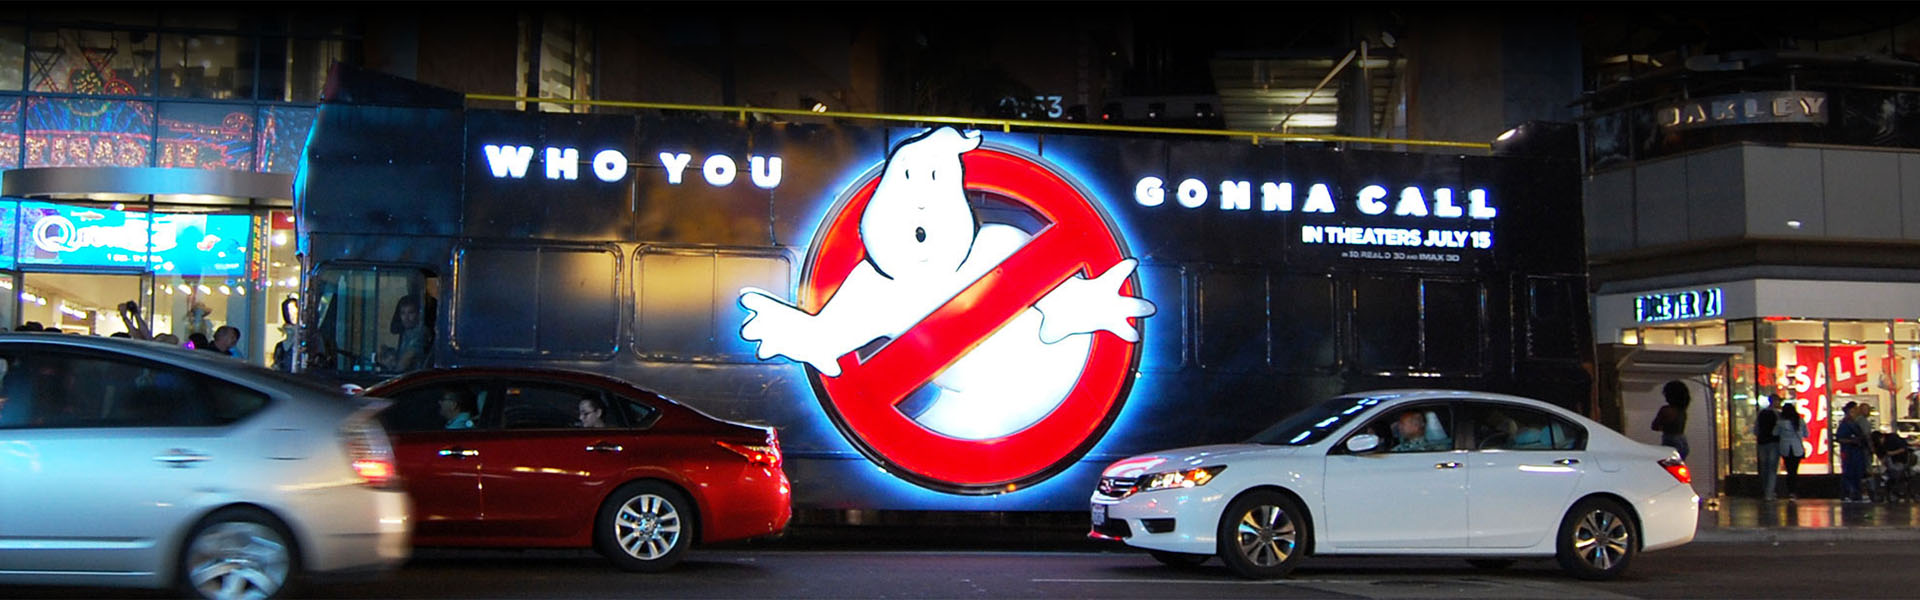 GHOSTBUSTERS BANNER